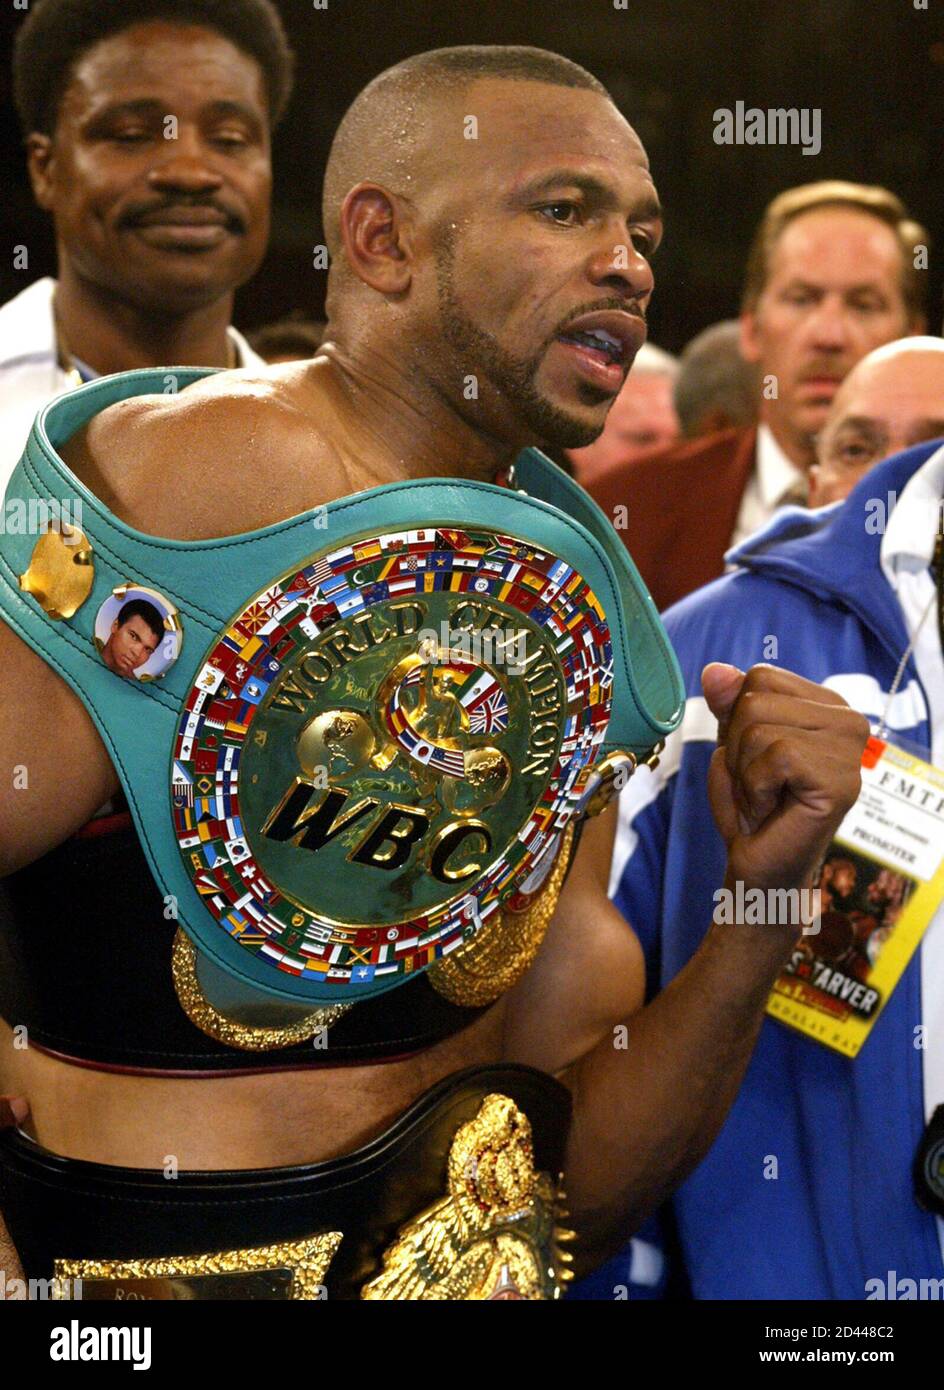 WBC/WBA light heavyweight champion Roy Jones Jr. of Pensacola, Florida  poses with his title belts after a majority decision win over Antonio  Tarver of Tampa, Florida, at the Mandalay Bay Events Center